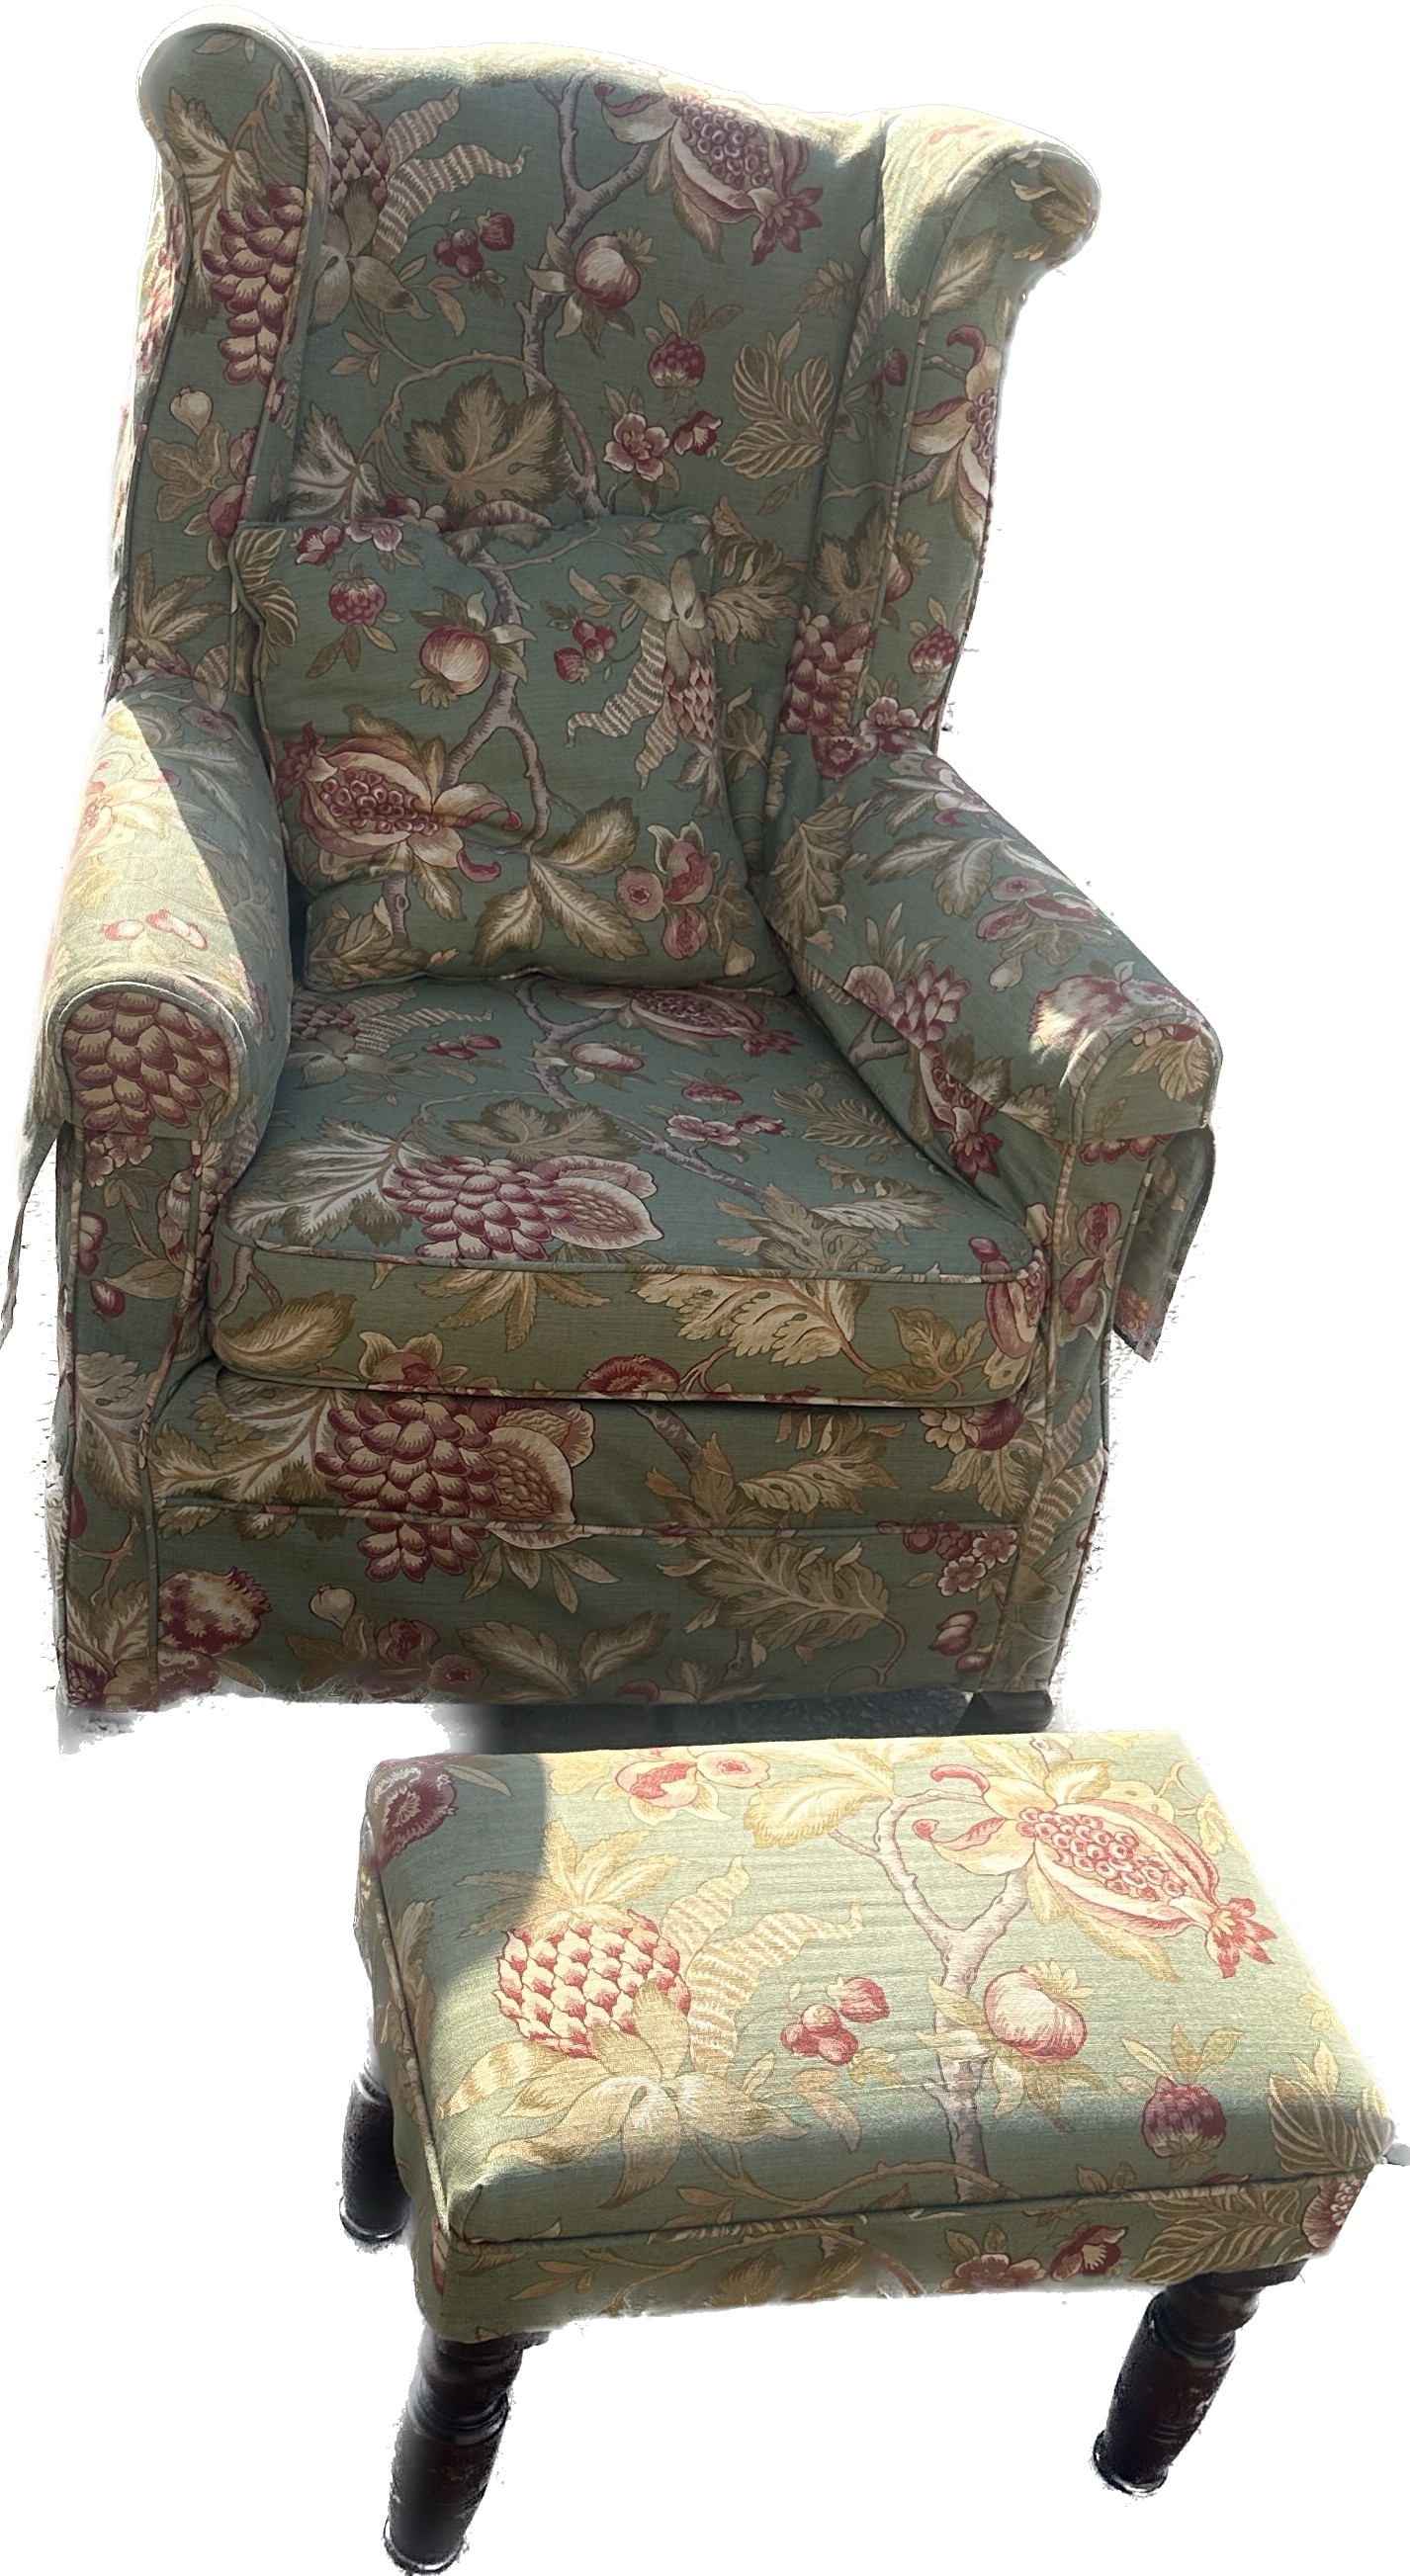 Antique reupholstered fire side chair and foot stool